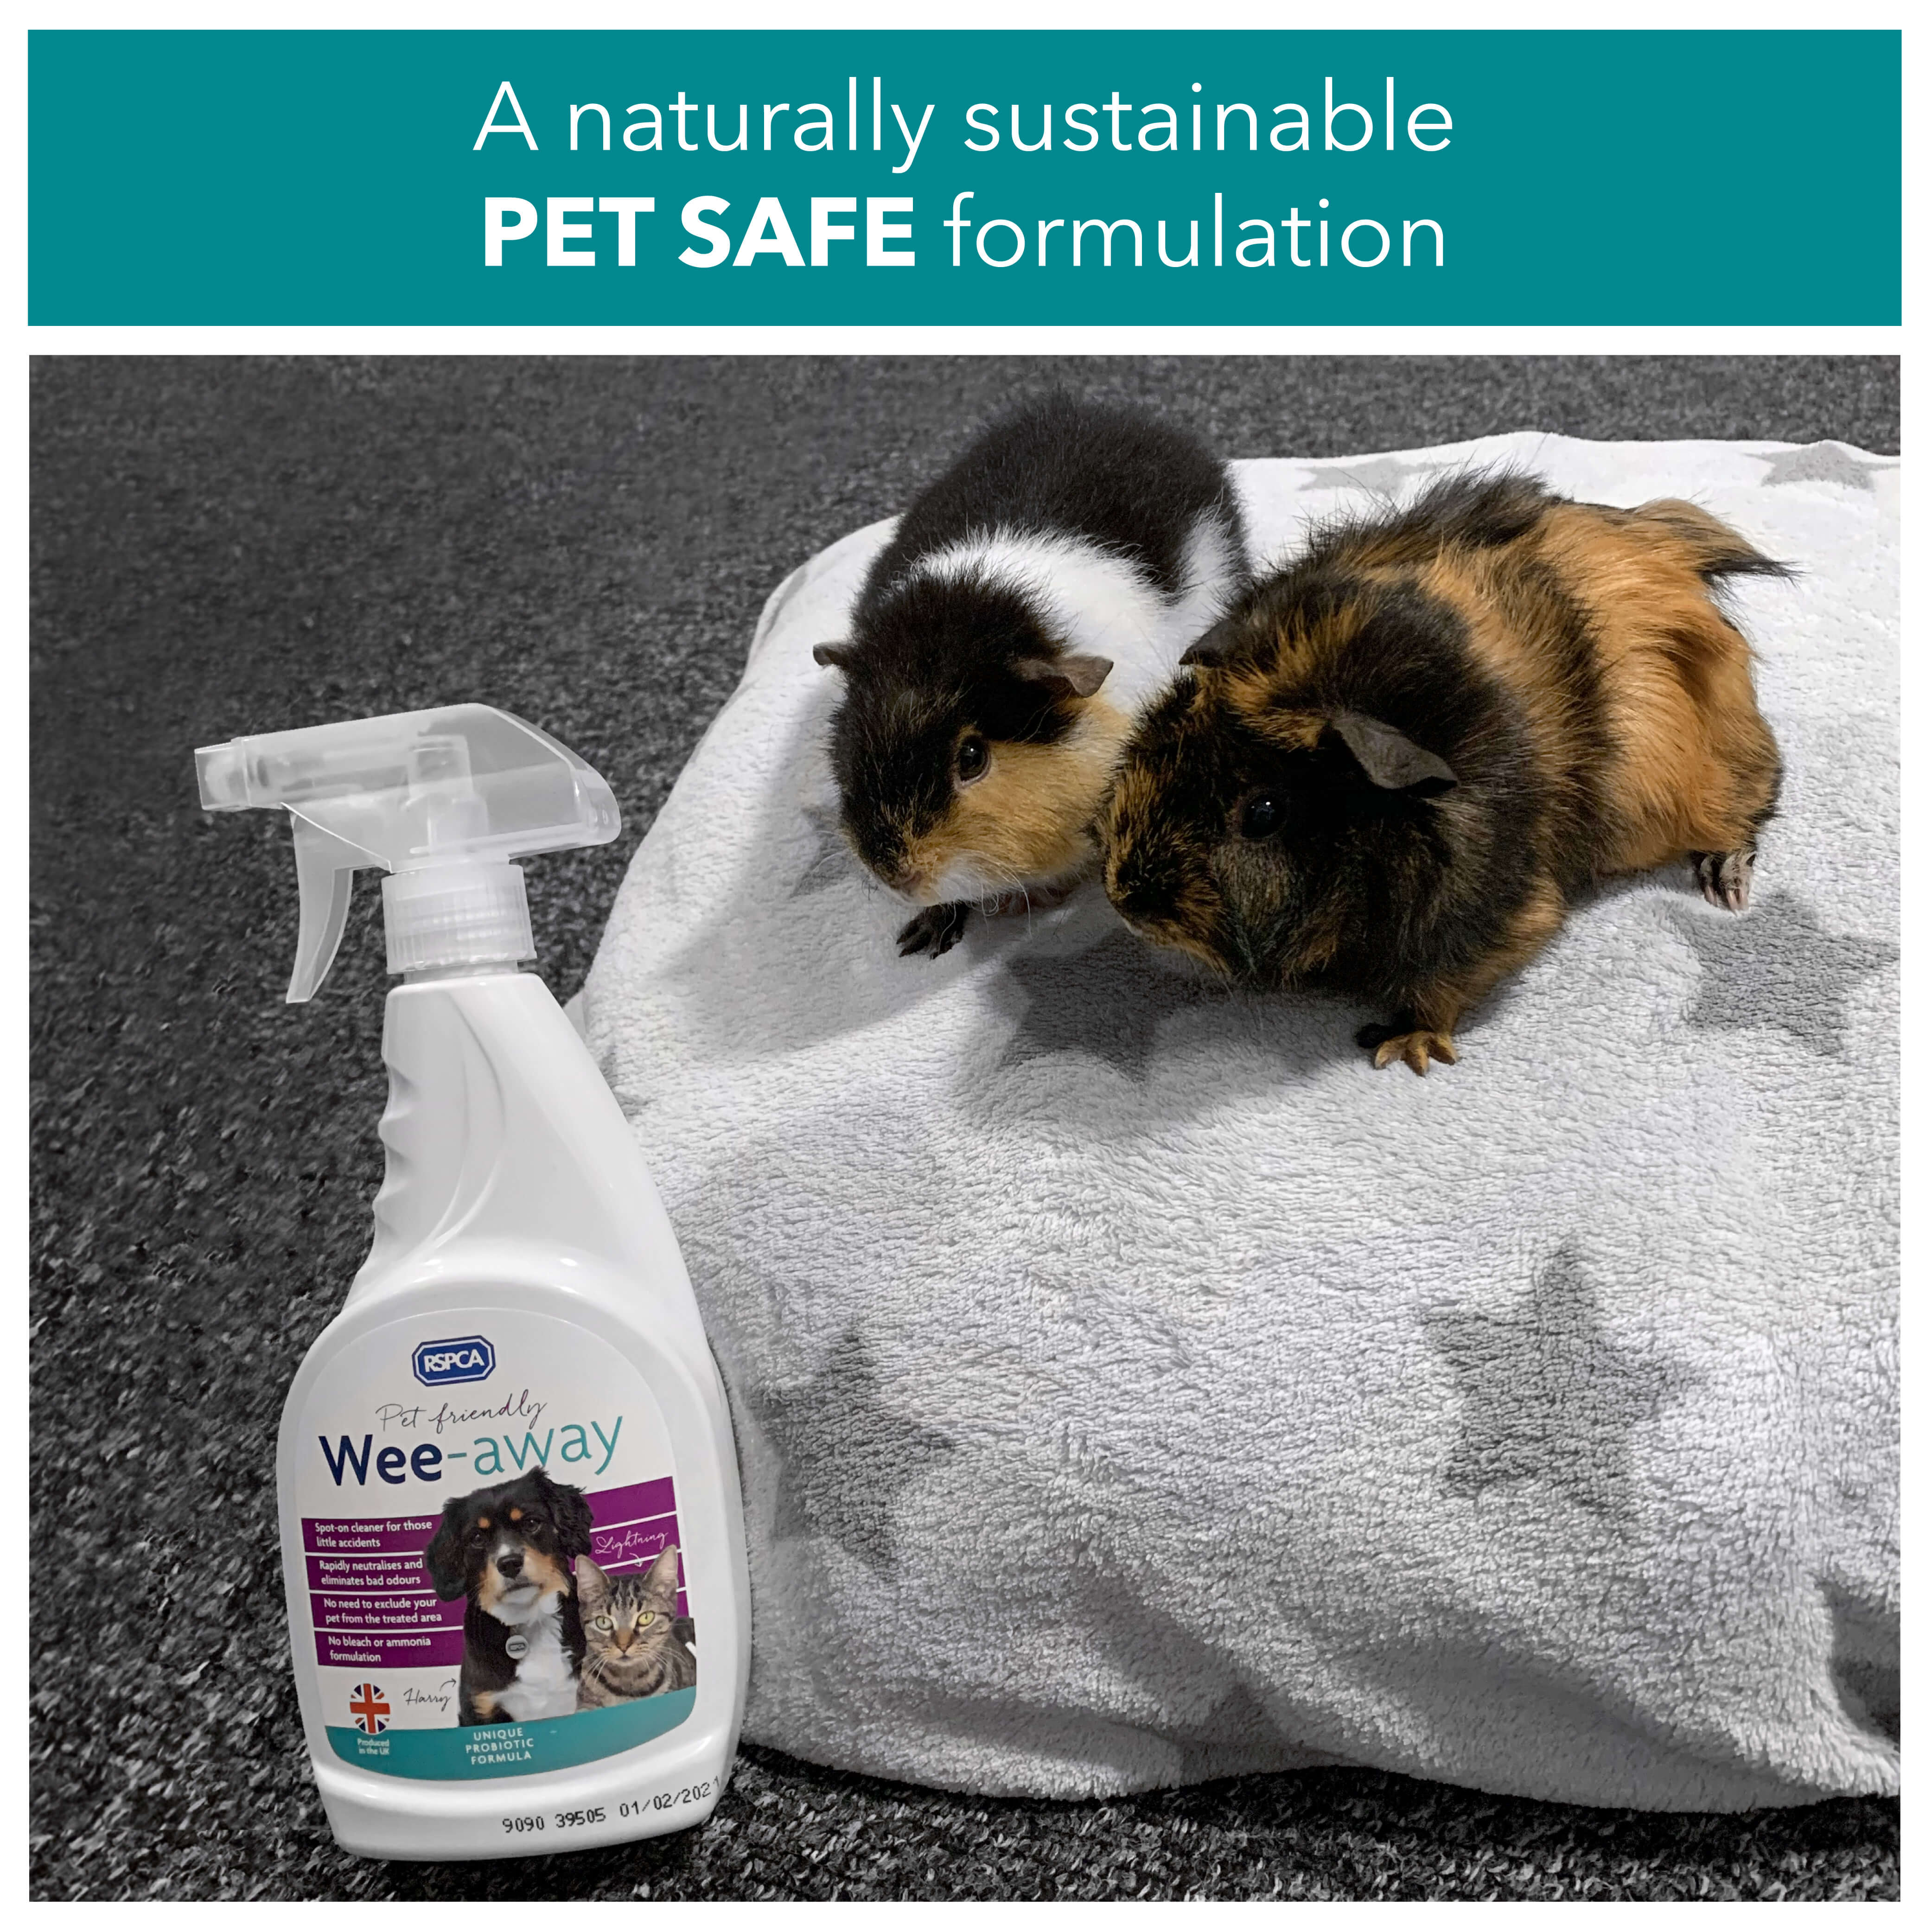 A naturally sustainable pet safe formulation